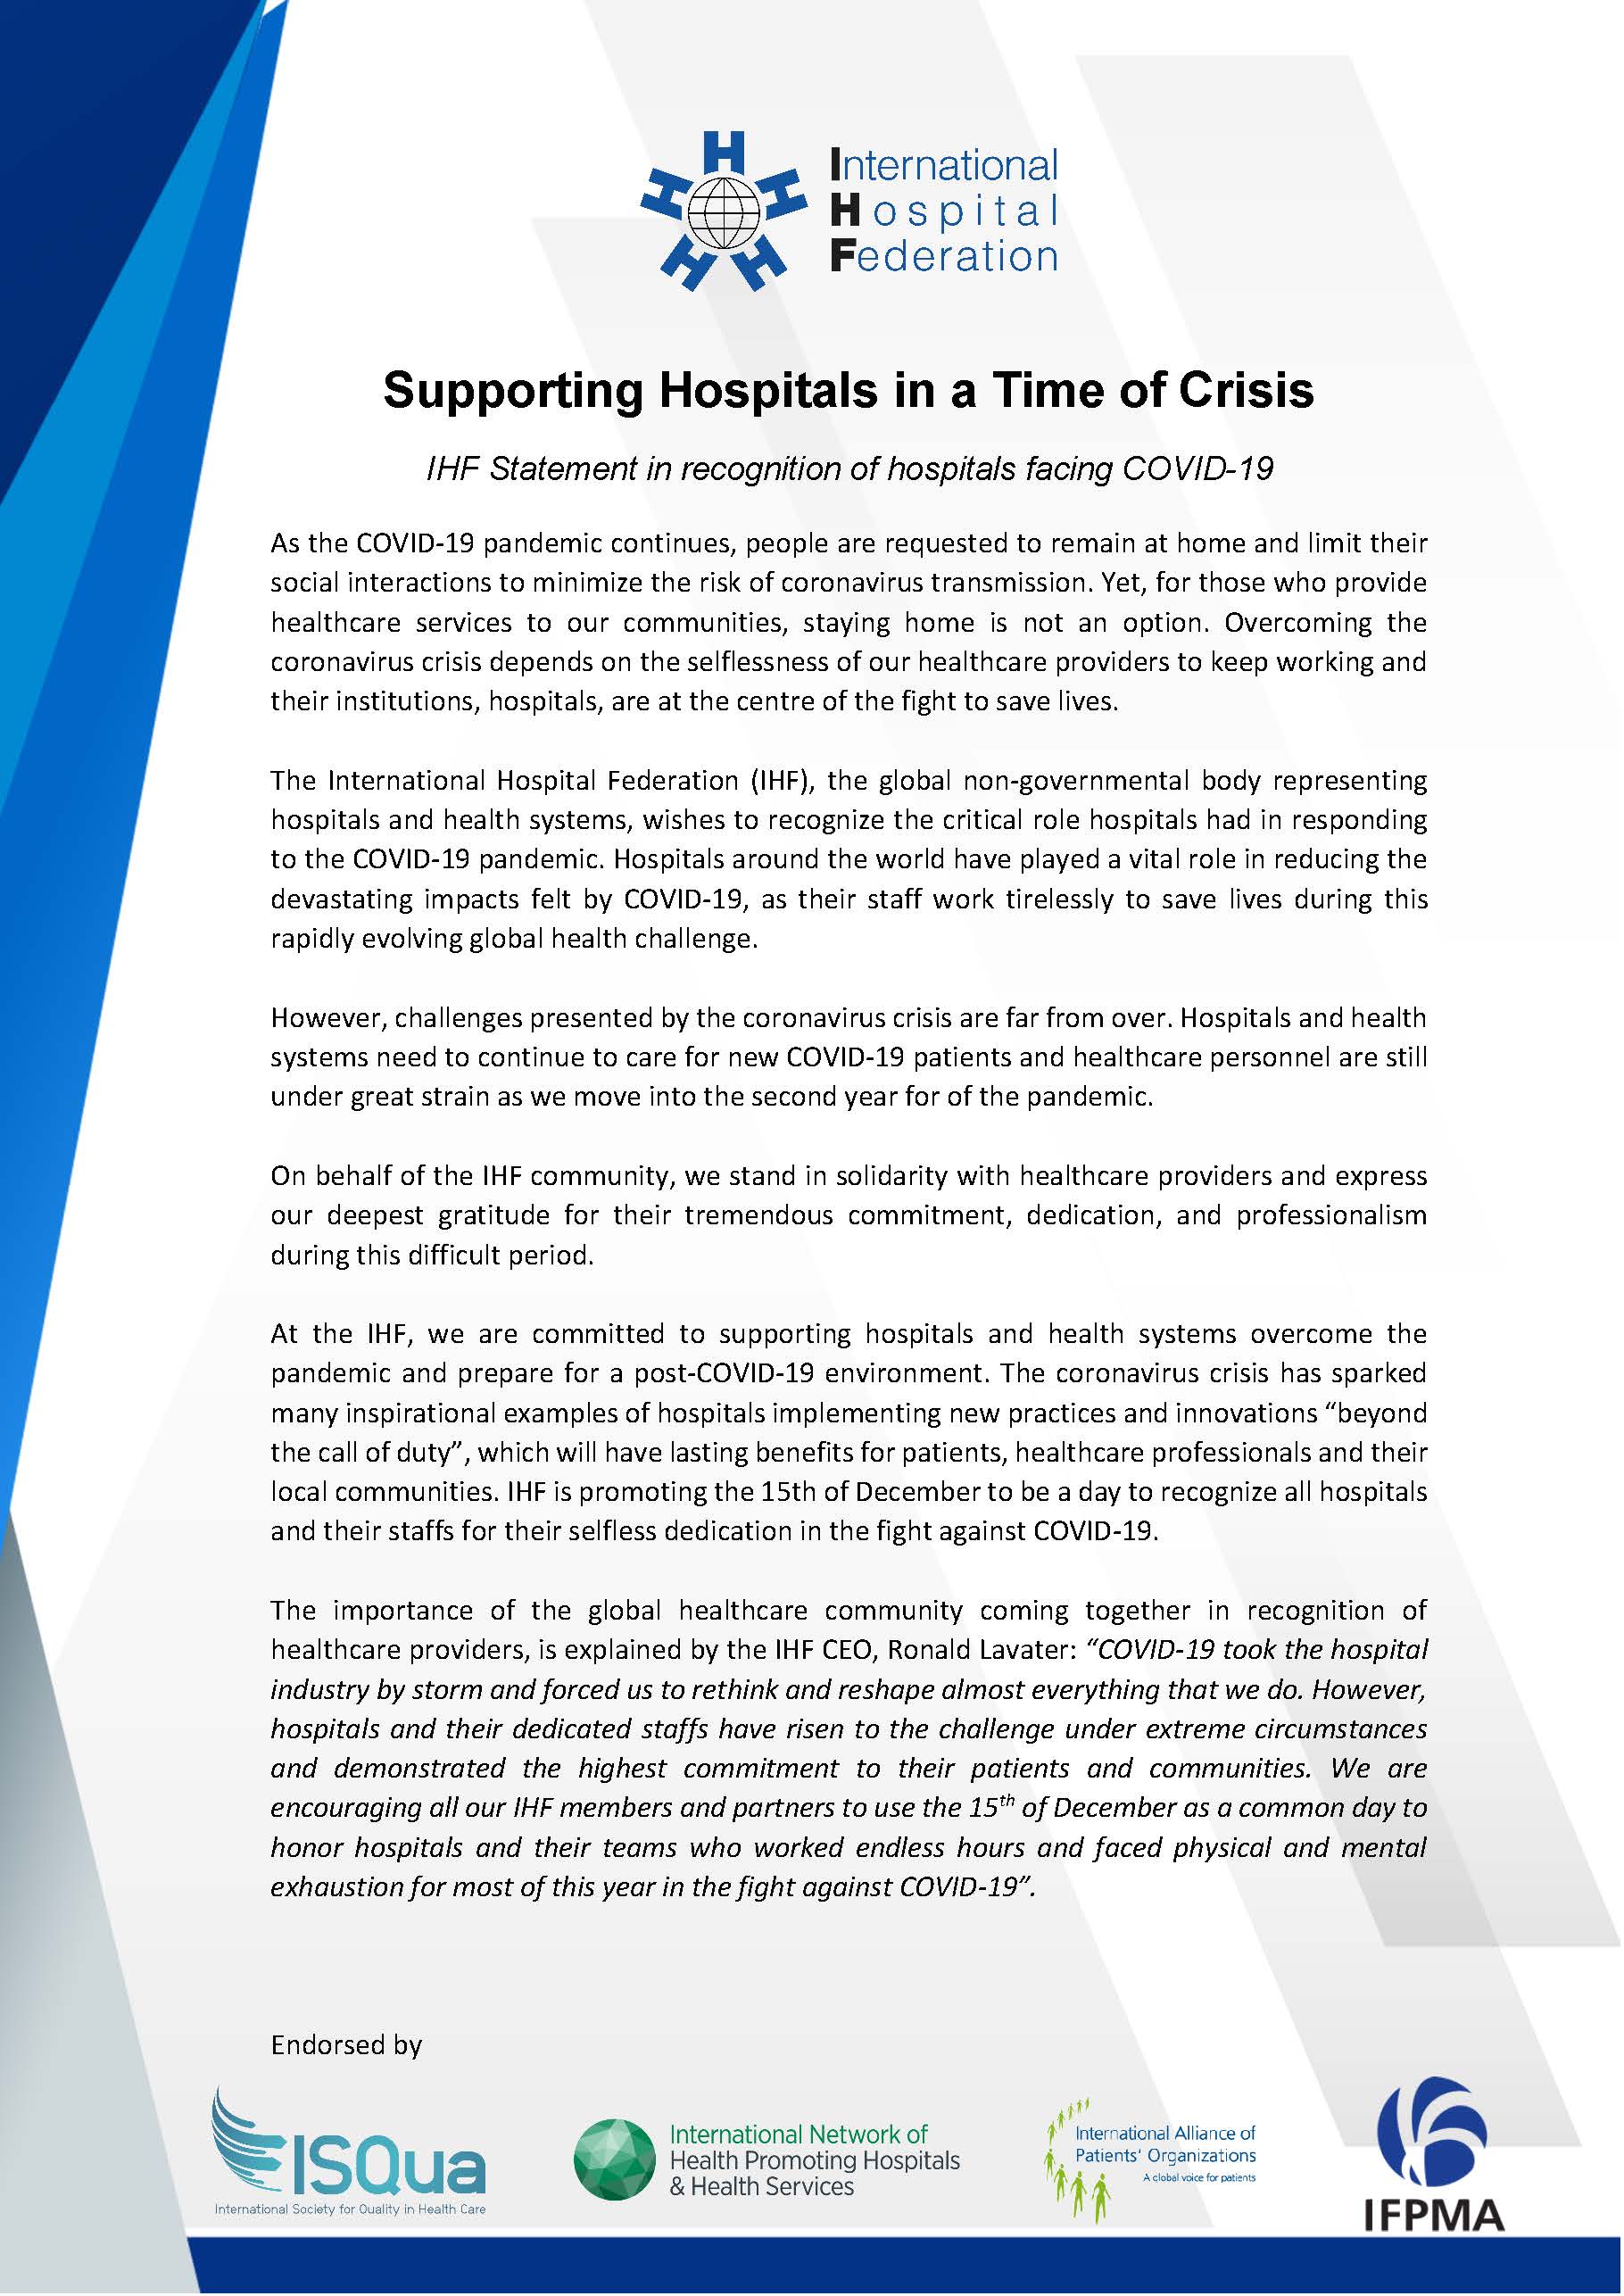 Recognition of Hospitals Statement